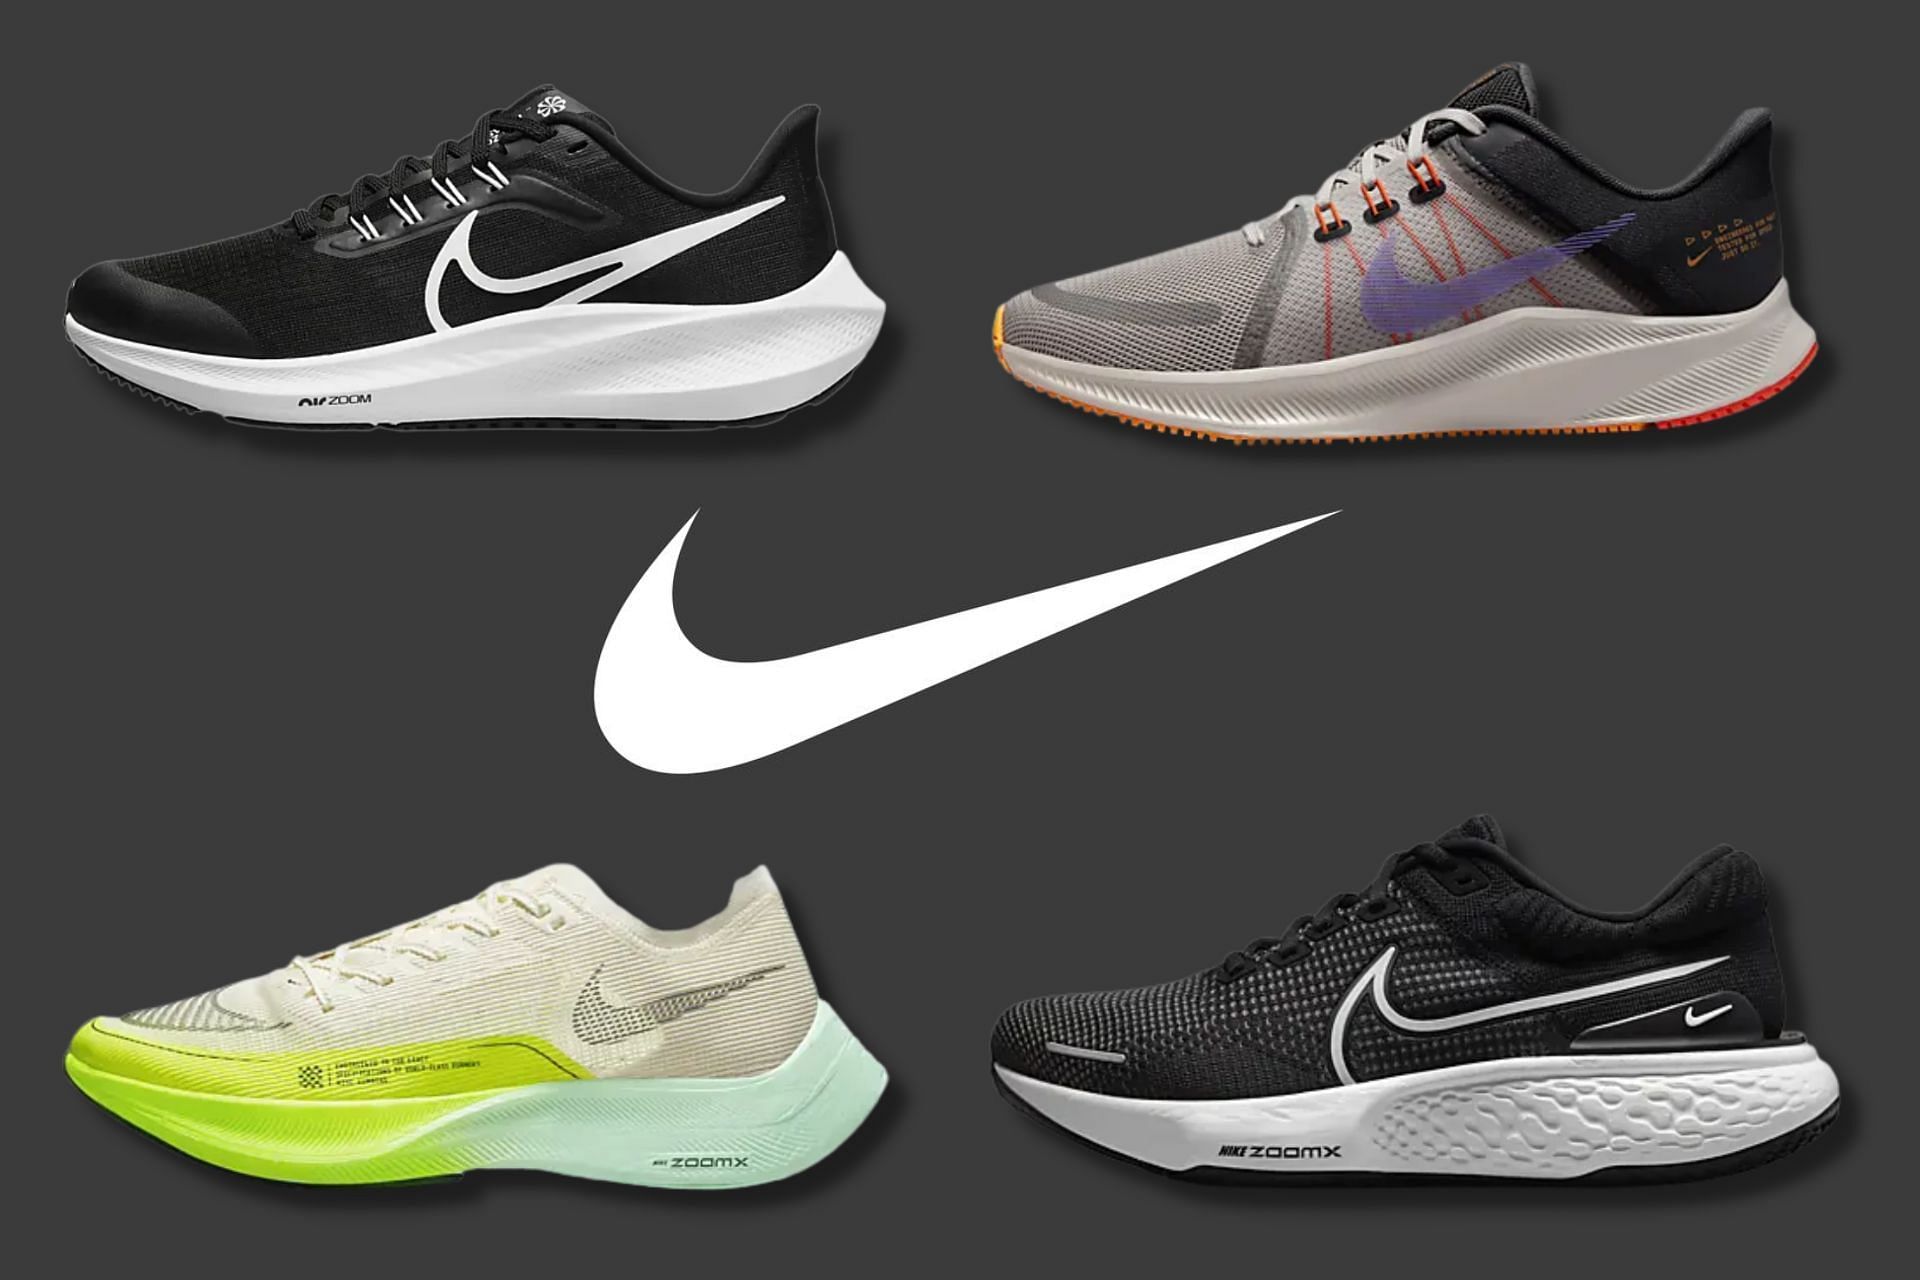 Top 4 Nike running shoes in 2022